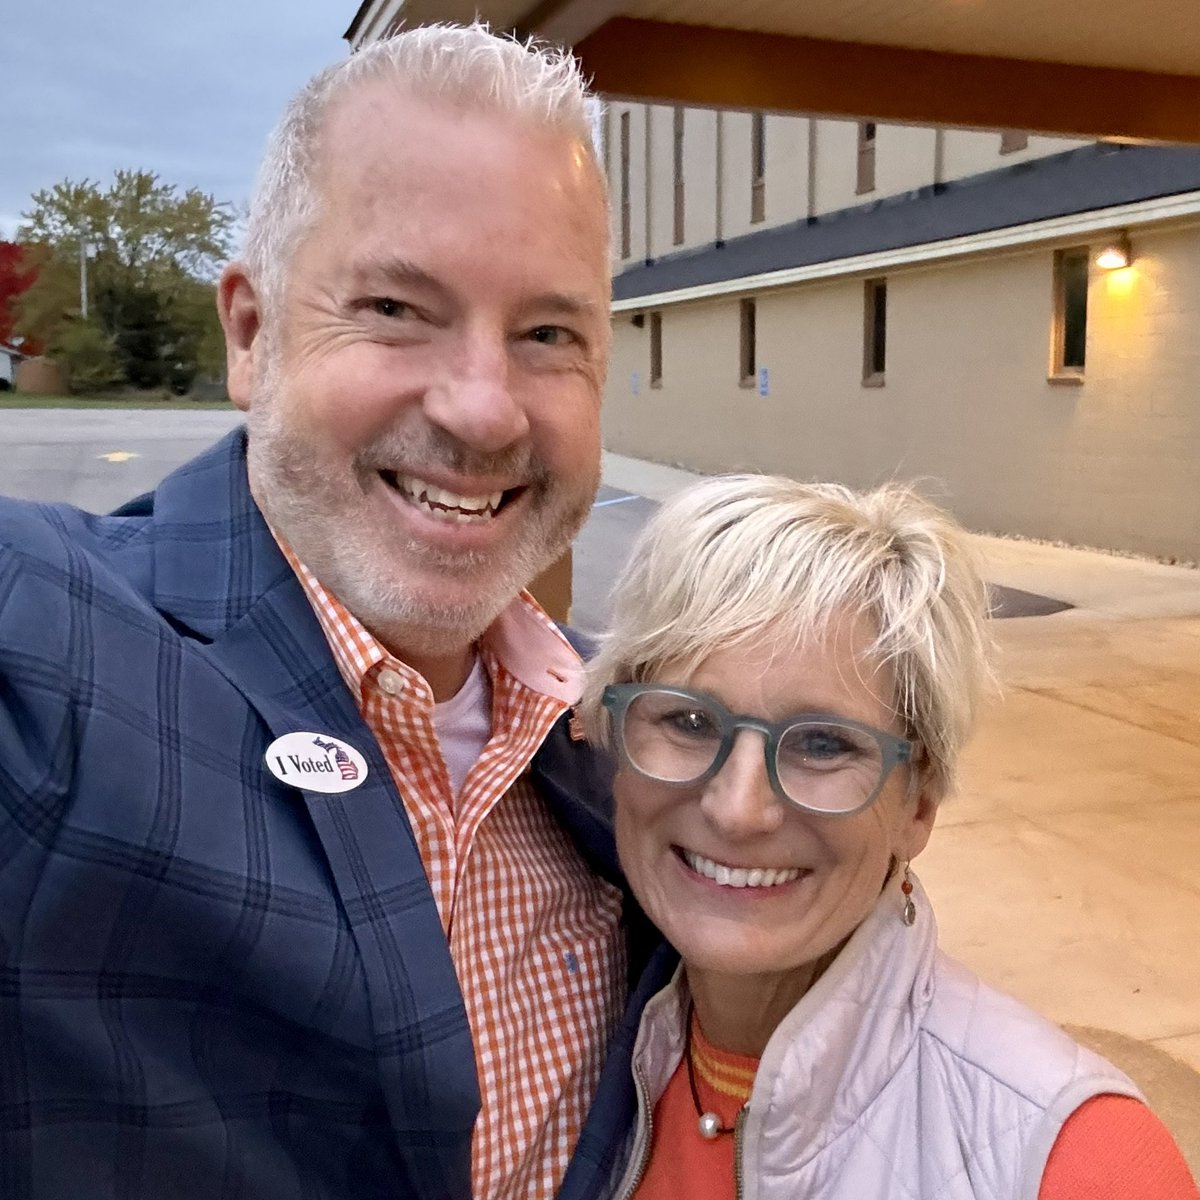 We voted Bocks for Mayor! How about you? This is Holland. Working Together. Building Community #ThisIsHolland #WorkingTogether #BuildingCommunity #OurFutureIsBright #AndWeGetToLiveHere